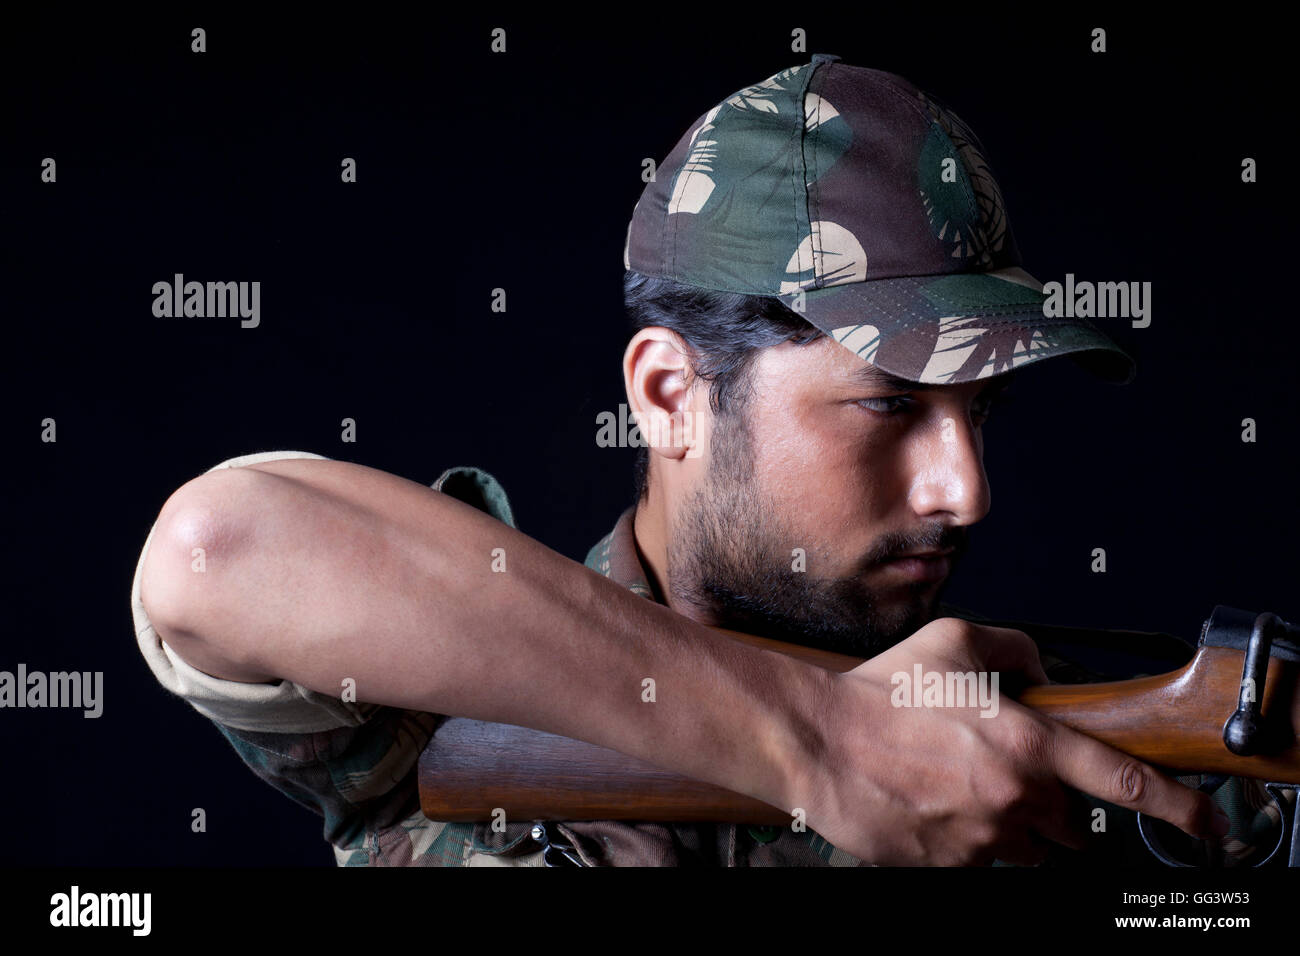 Army man aiming with a rifle Stock Photo